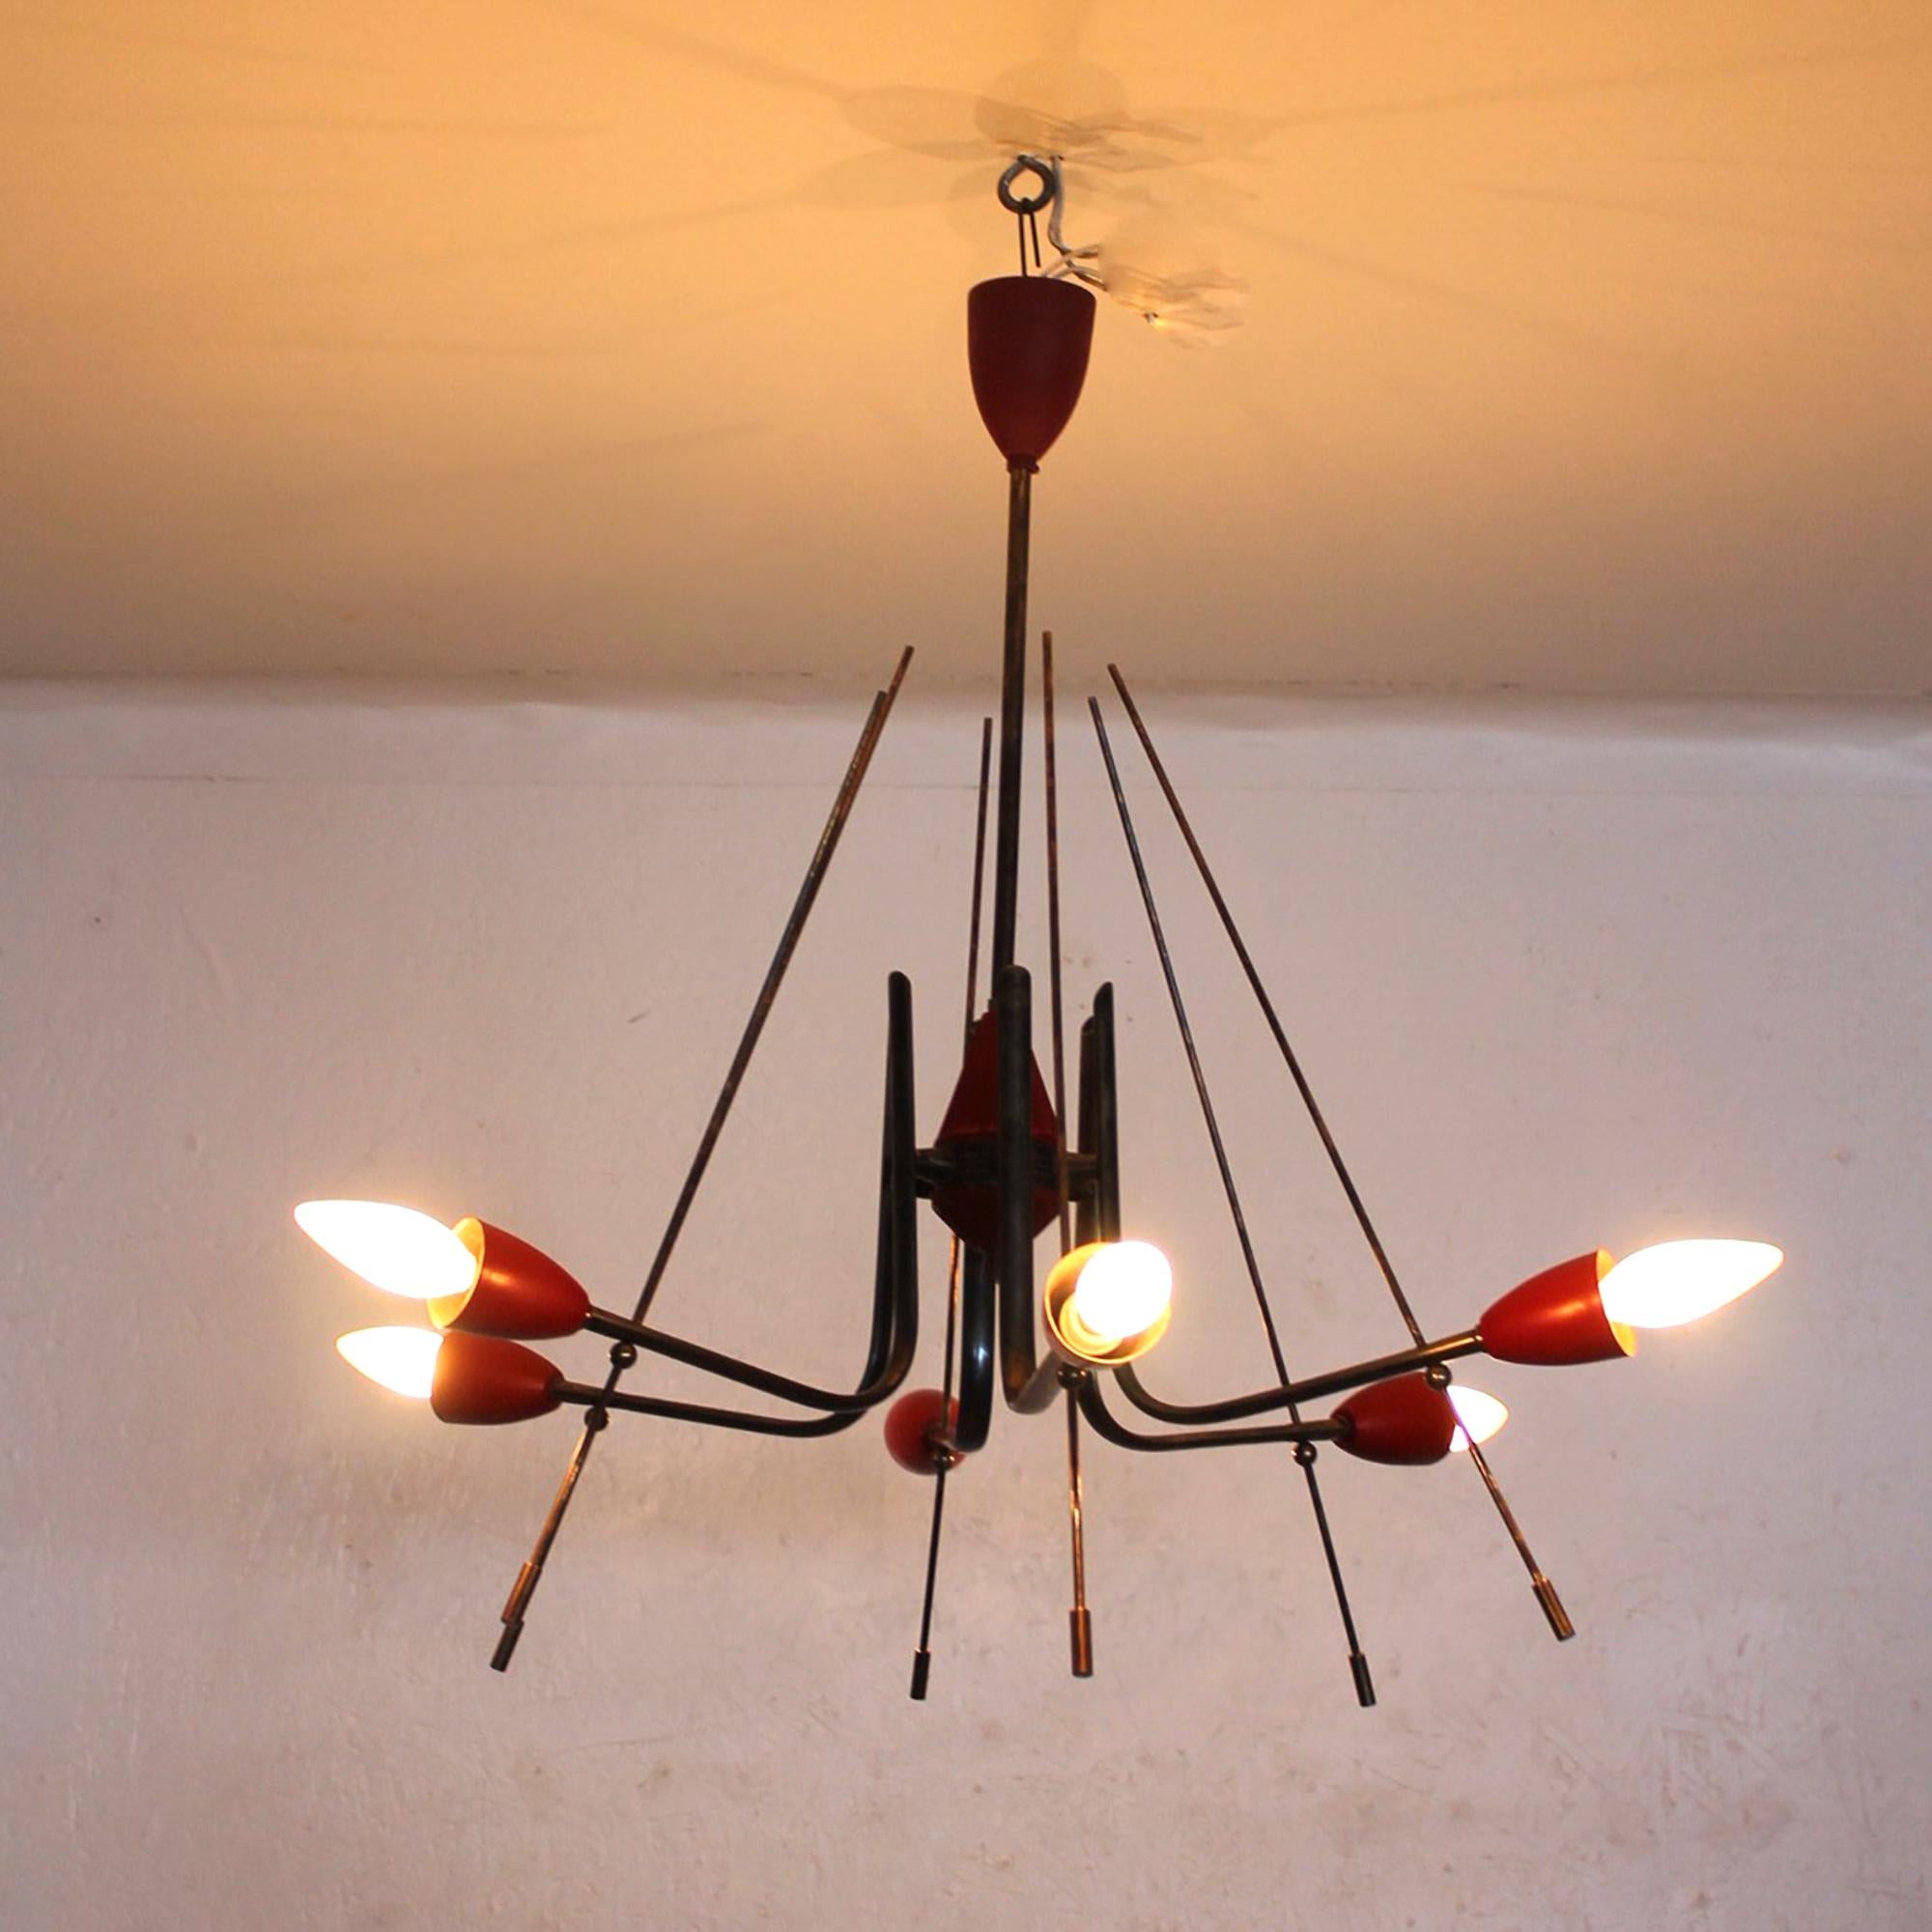 Mid-Century Modern STILNOVO Atomic Futuristic Solid Brass Chandelier Painted Red Italy 1950s